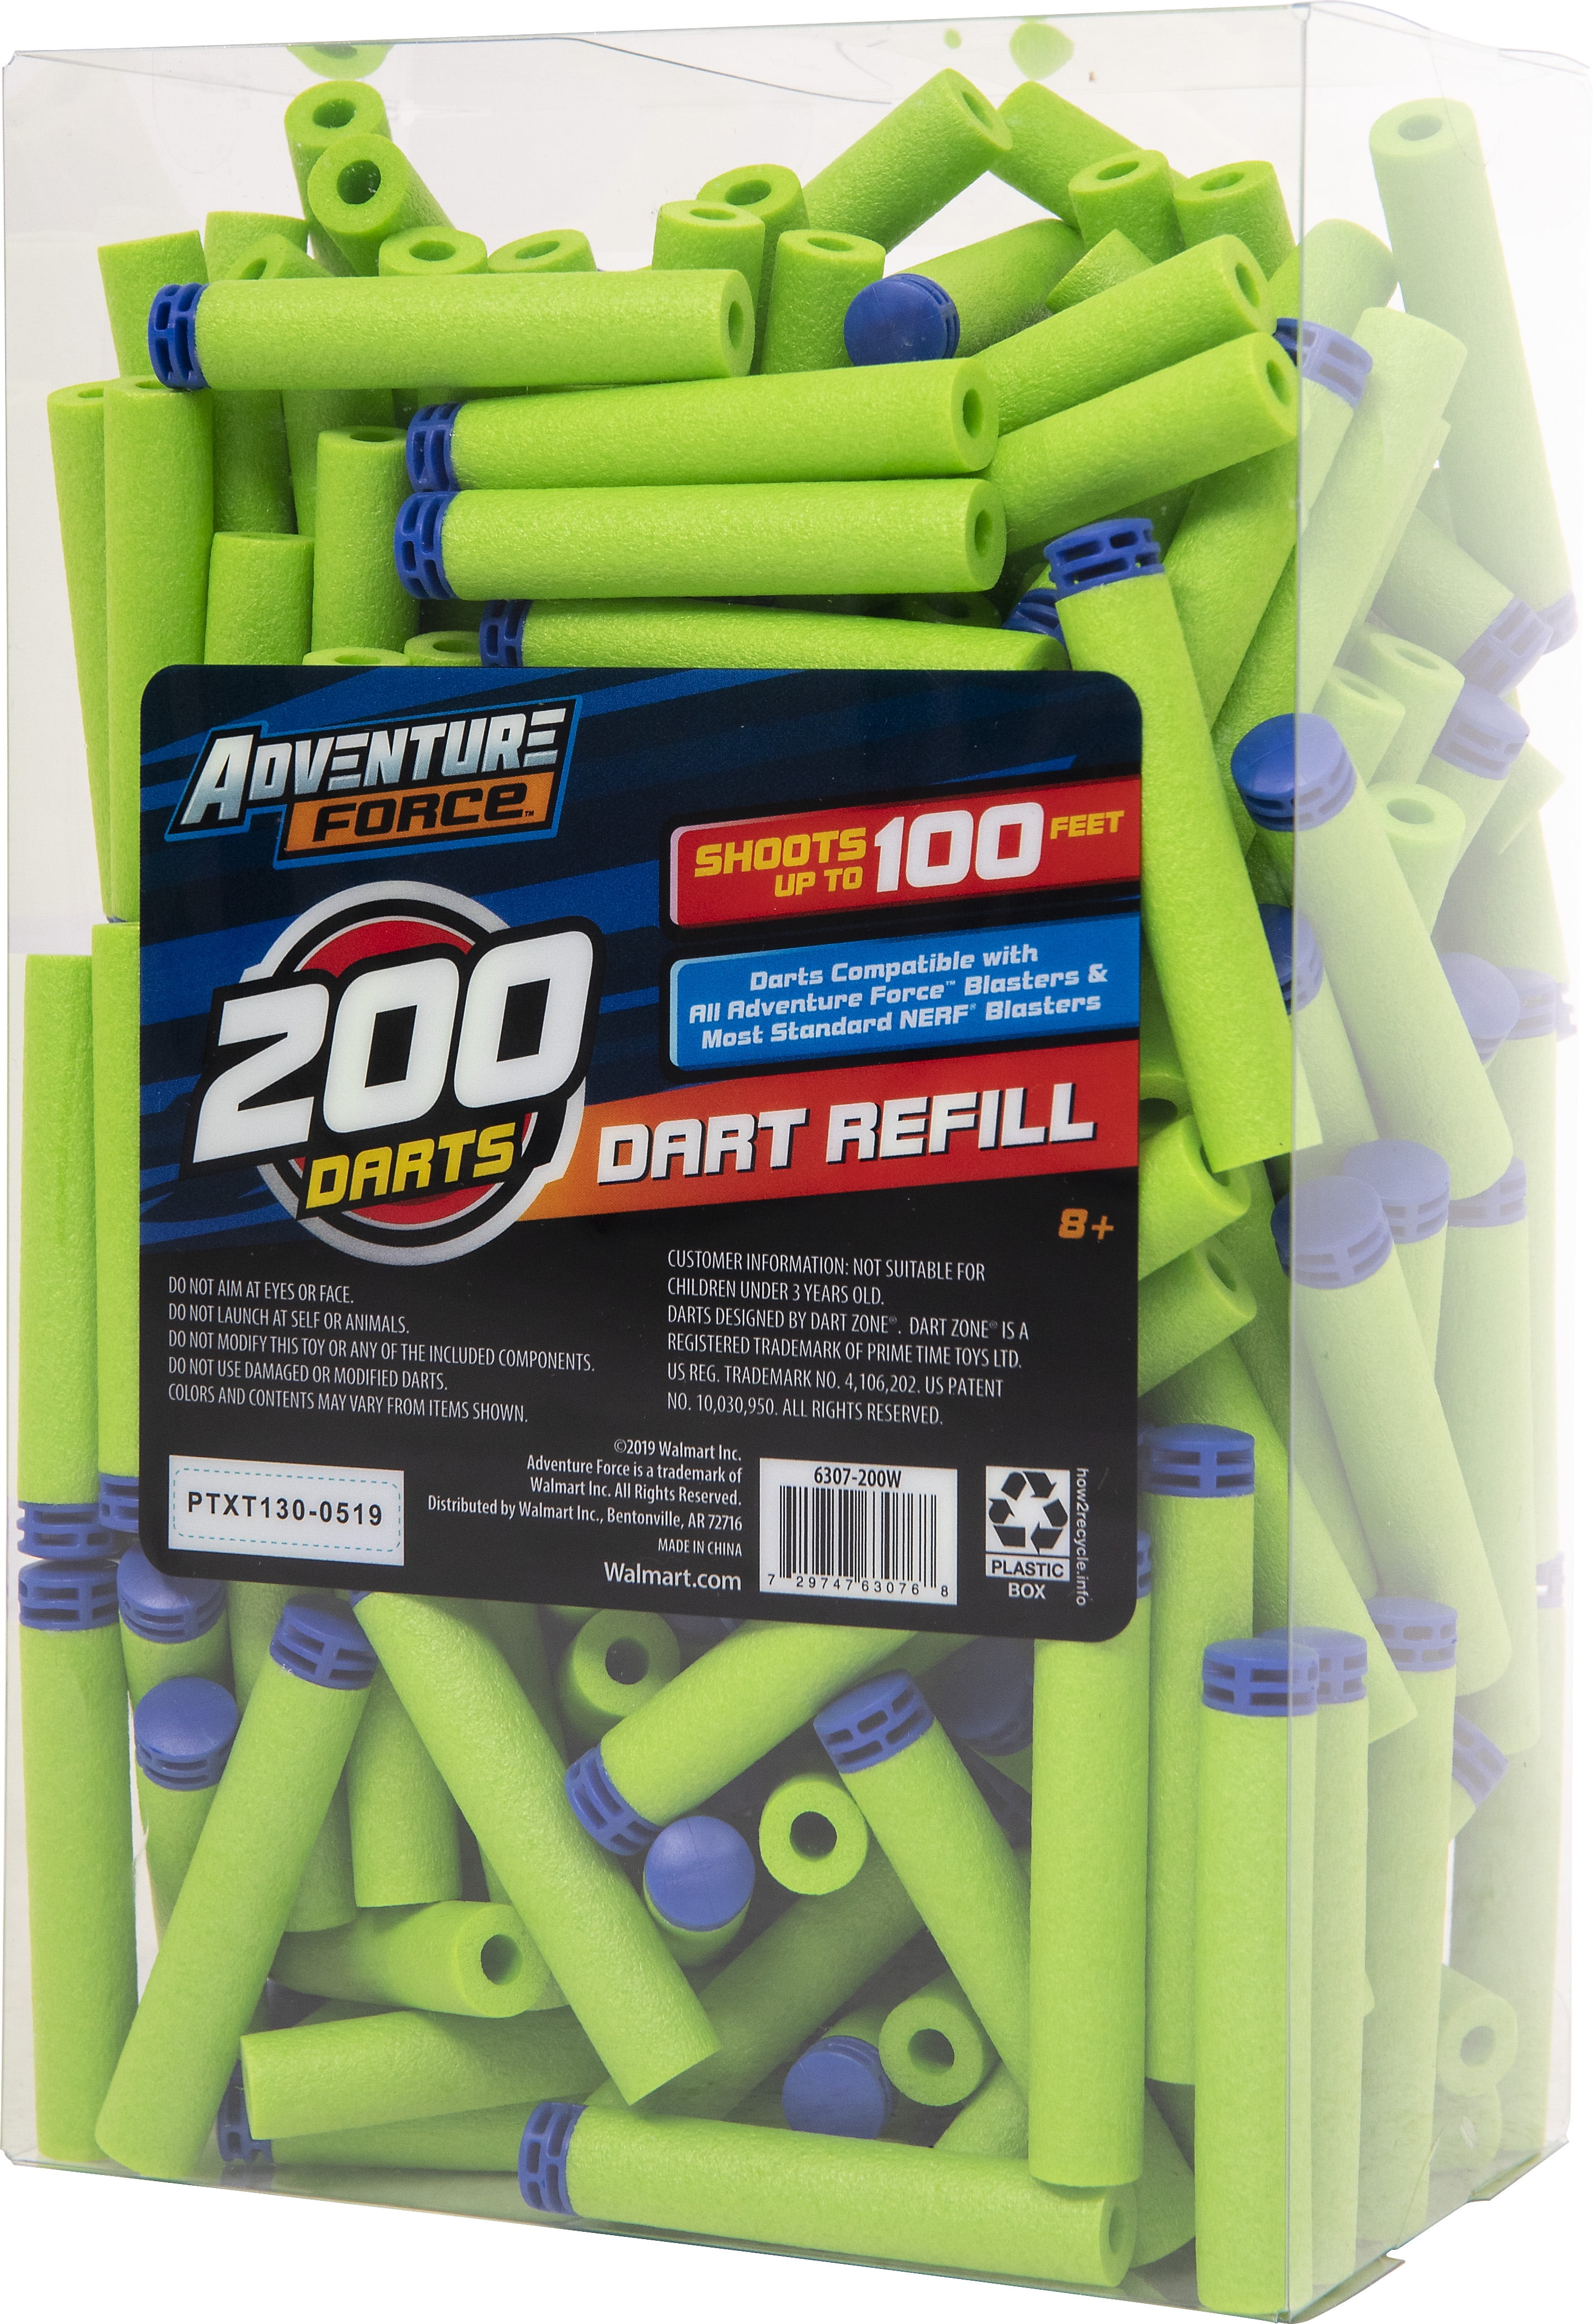 Adventure Force 200 Dart Refill Pack - Compatible with All Adventure Force  and most standard NERF Dart Blasters - Walmart.com